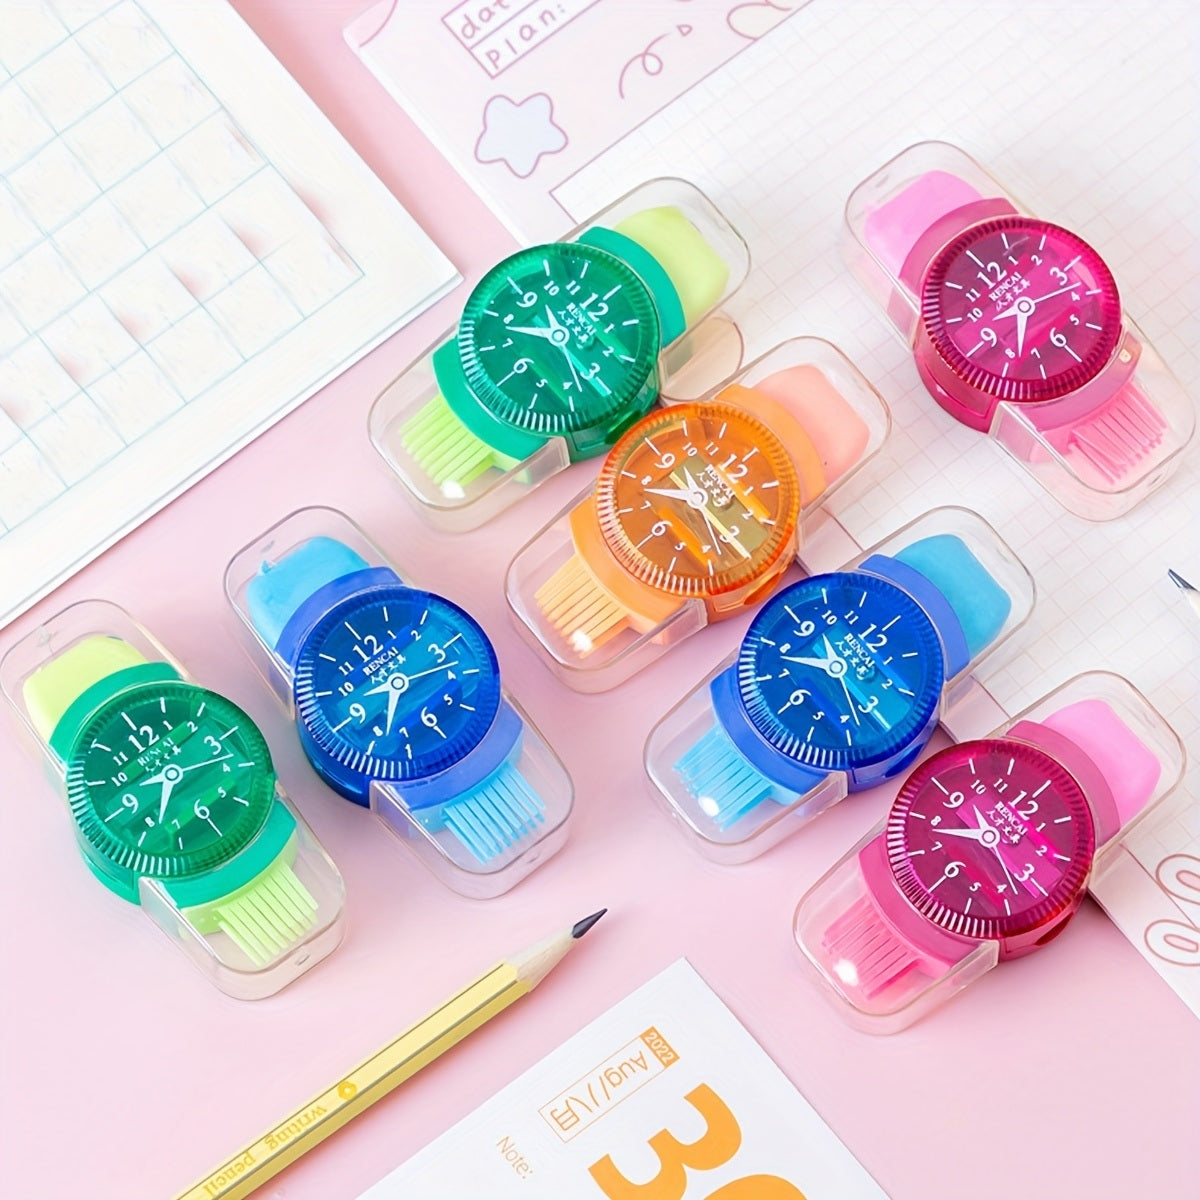 Four 4pcs Creative Watch Shape Pencil Sharpeners with translucent bands are elegantly displayed in a row against a light background. Each sharpener features a distinctively colored strap and matching dial, designed to complement any outfit stylishly.